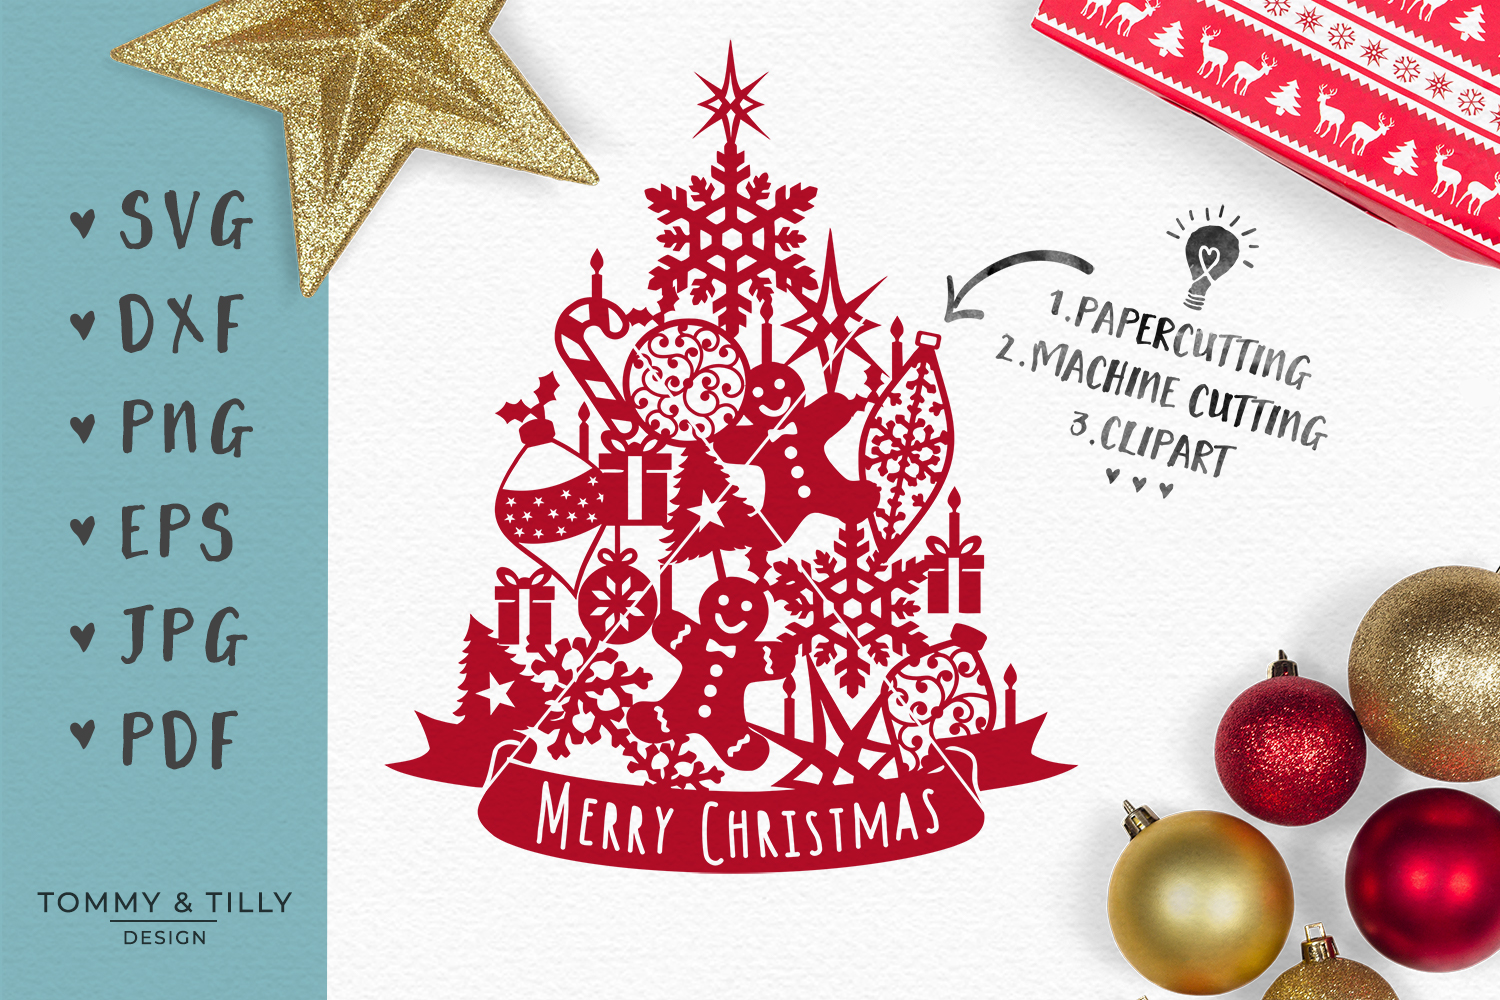 Download Assorted Christmas Tree - SVG EPS DXF PNG PDF JPG Cut File ...